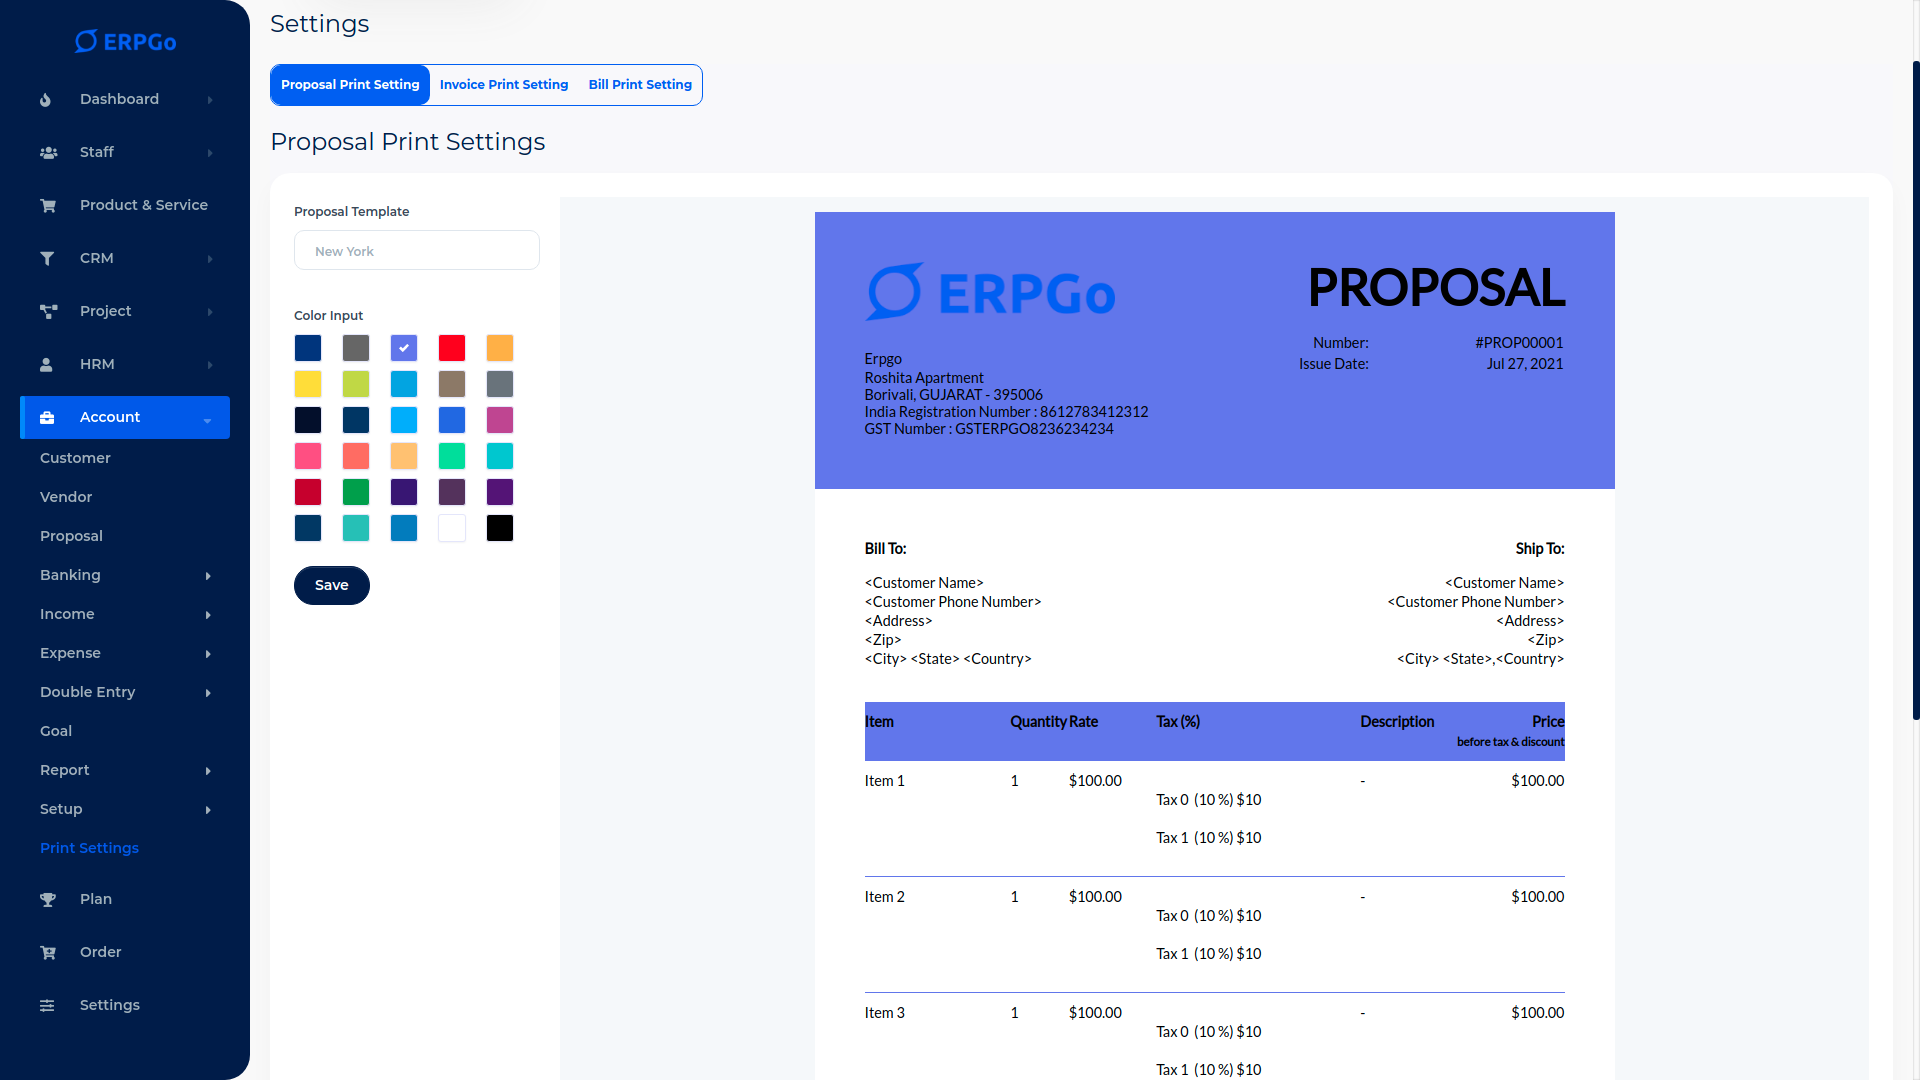 ERPGo SaaS - All In One Business ERP With Project, Account, HRM & CRM - 22